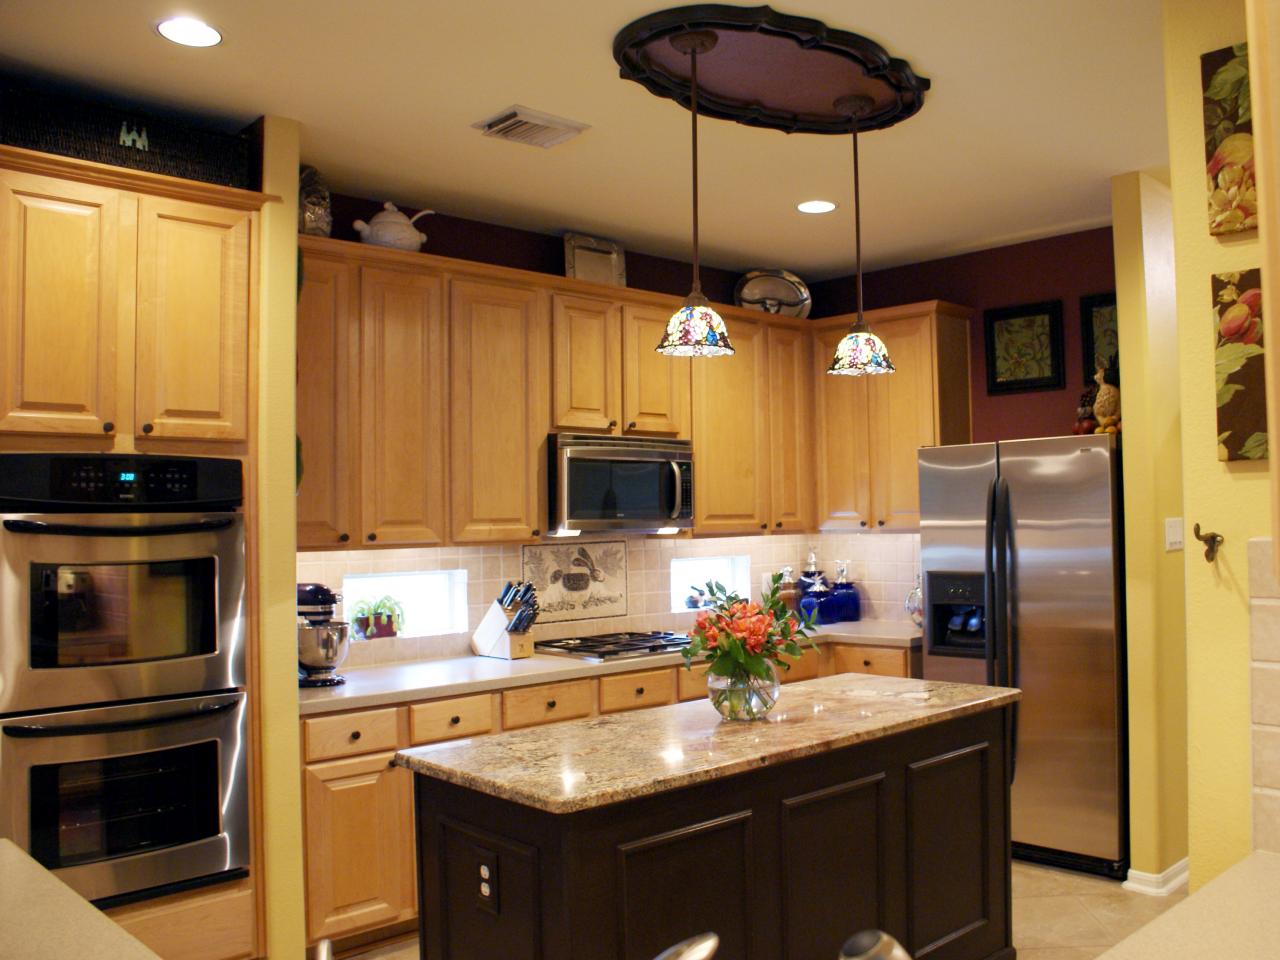 Cabinets Should You Replace Or Reface, How Much To Replace Kitchen Cabinets Doors